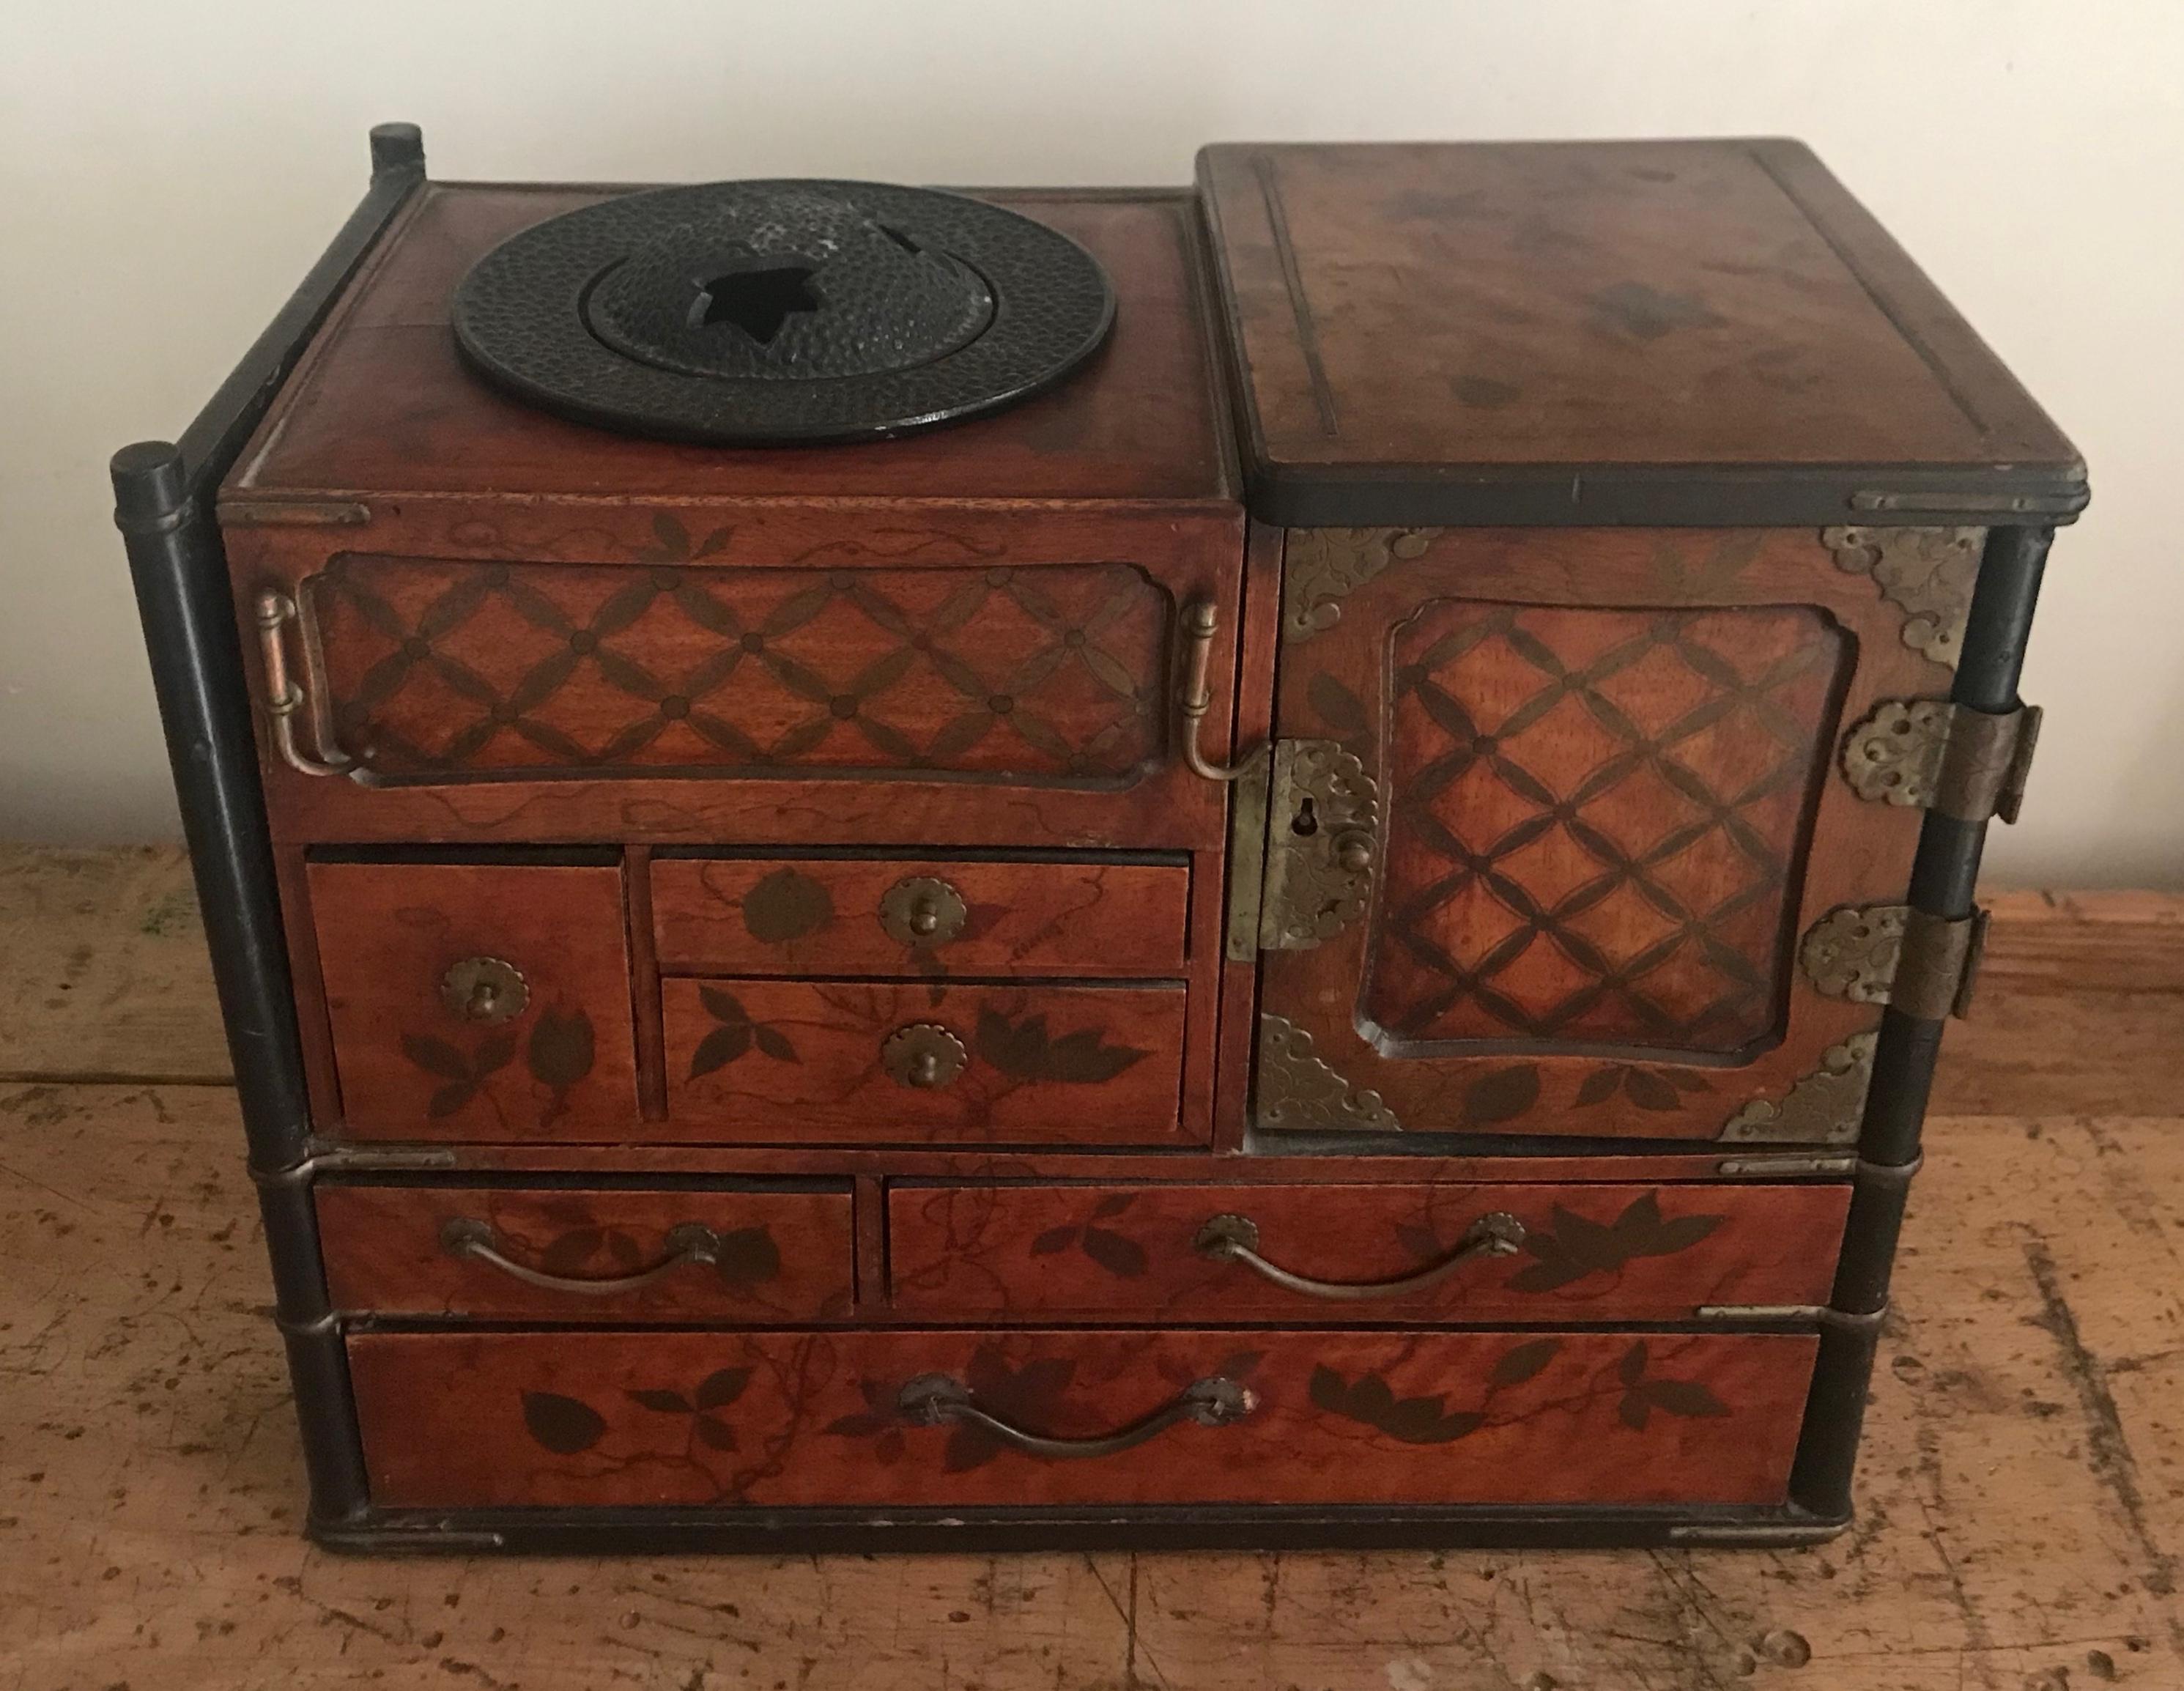 19th century Japanese lacquered tansu used for opium smoking. Having 8 drawers used to store smoking paraphernalia . Lacquered in a deep cinnabar colour with brown/black details. Bronze hardware includes the original swivelling hooks to hold the